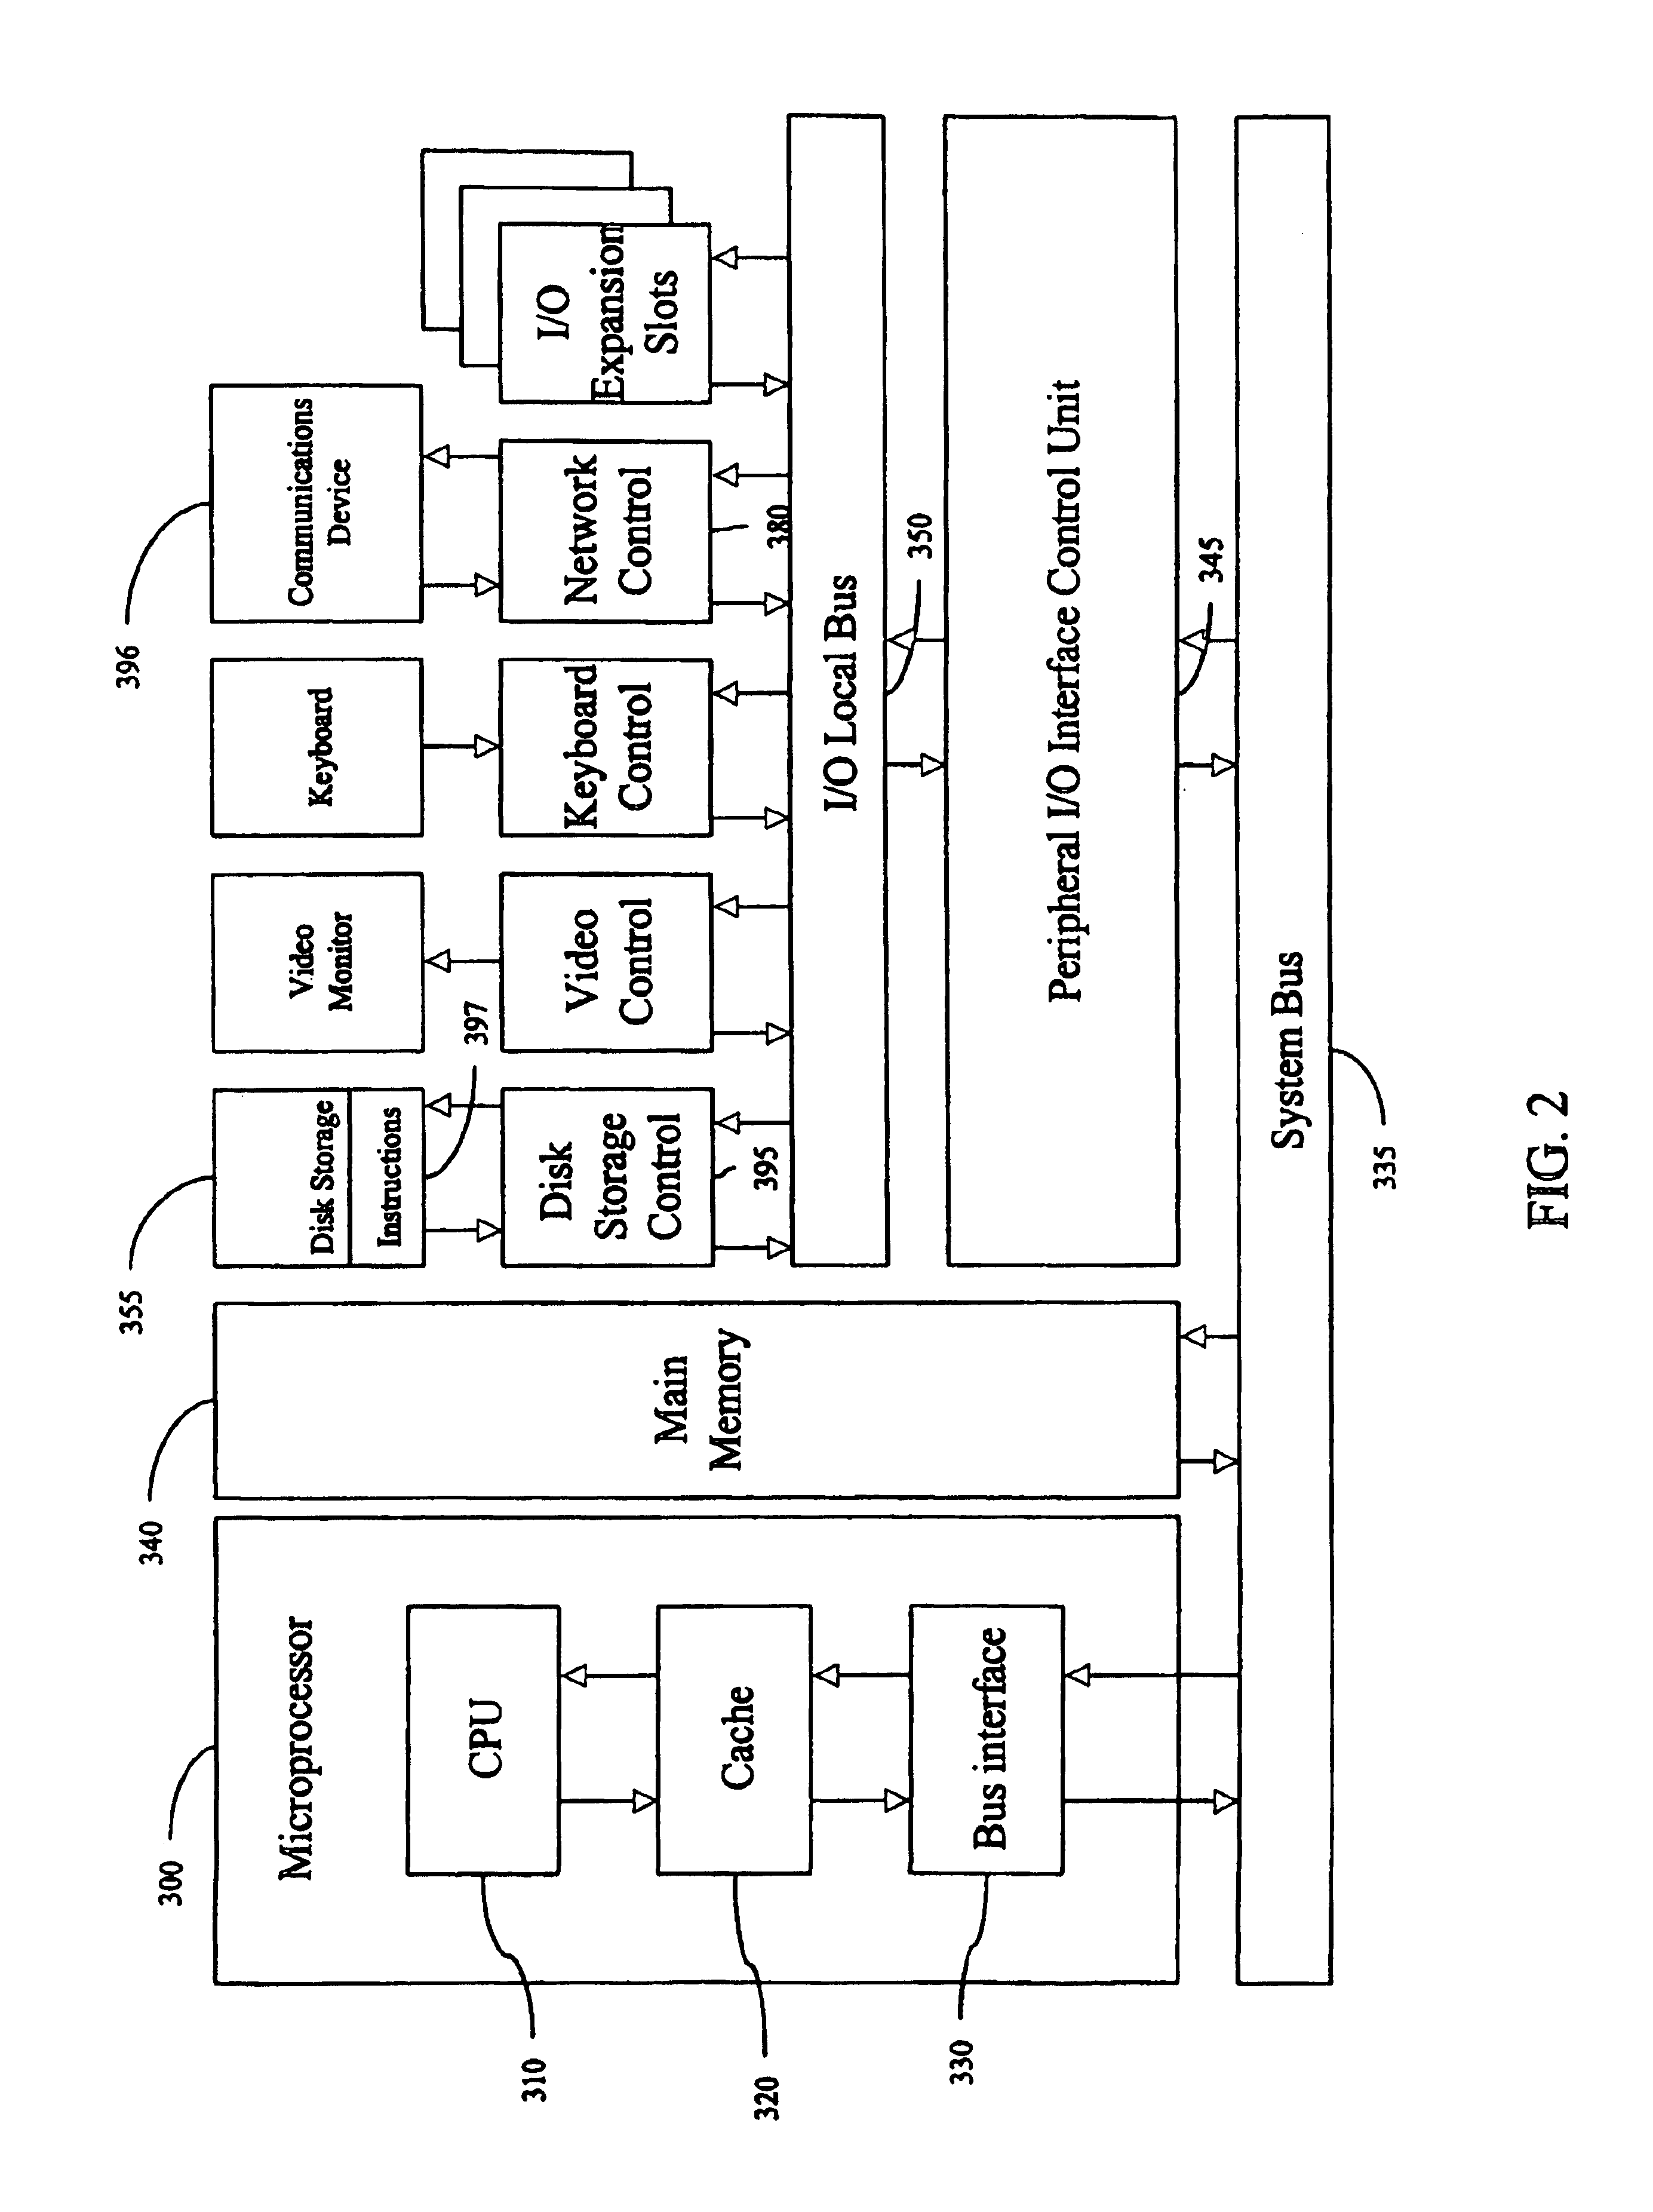 Method and apparatus for intelligent data assimilation